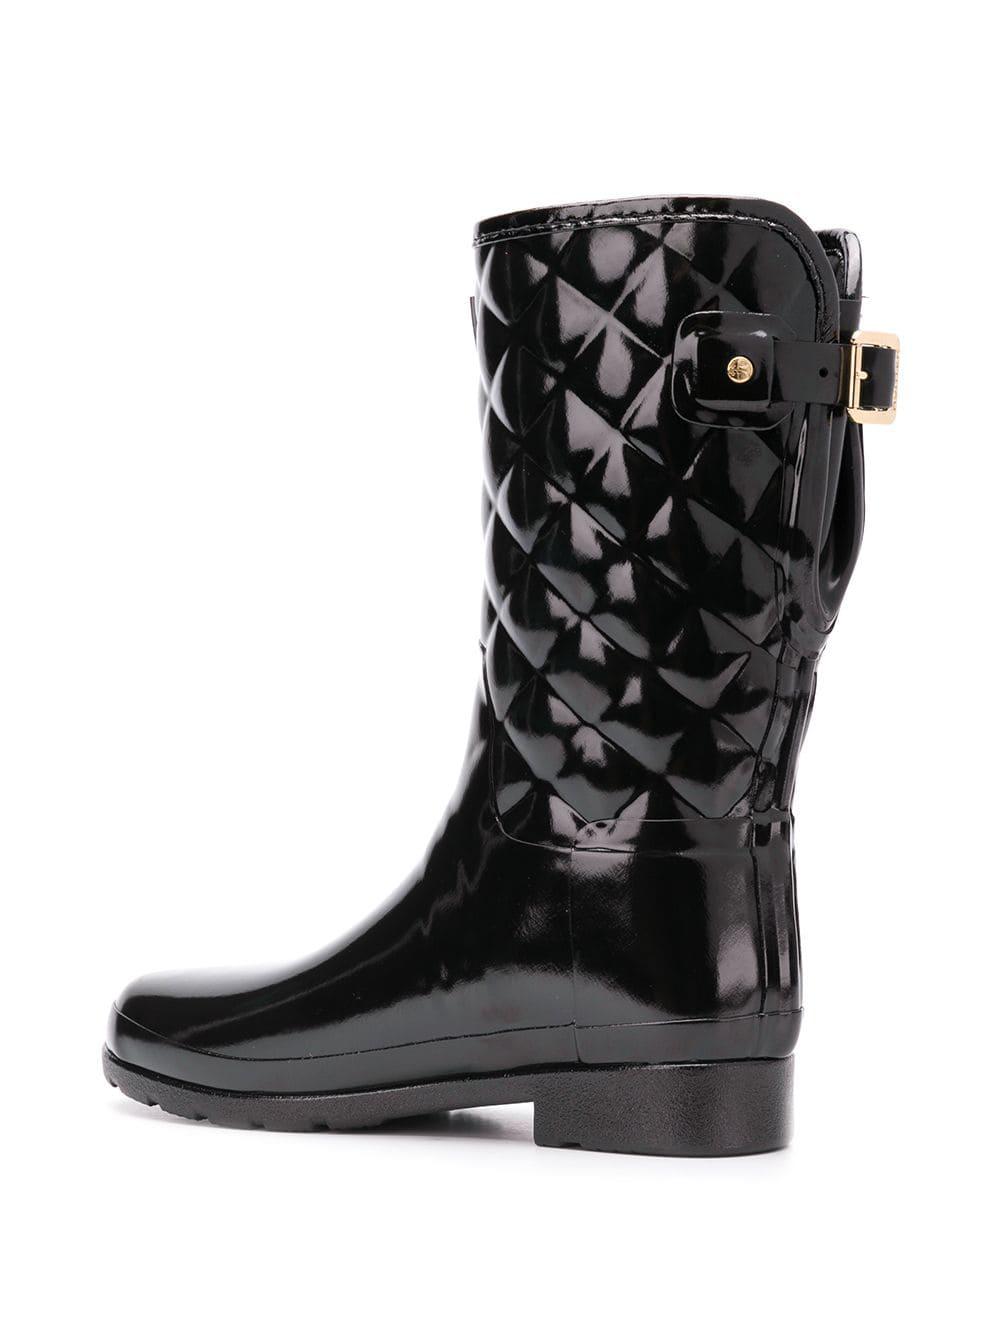 HUNTER Rubber Refined Short Quilted Wellies in Black - Lyst